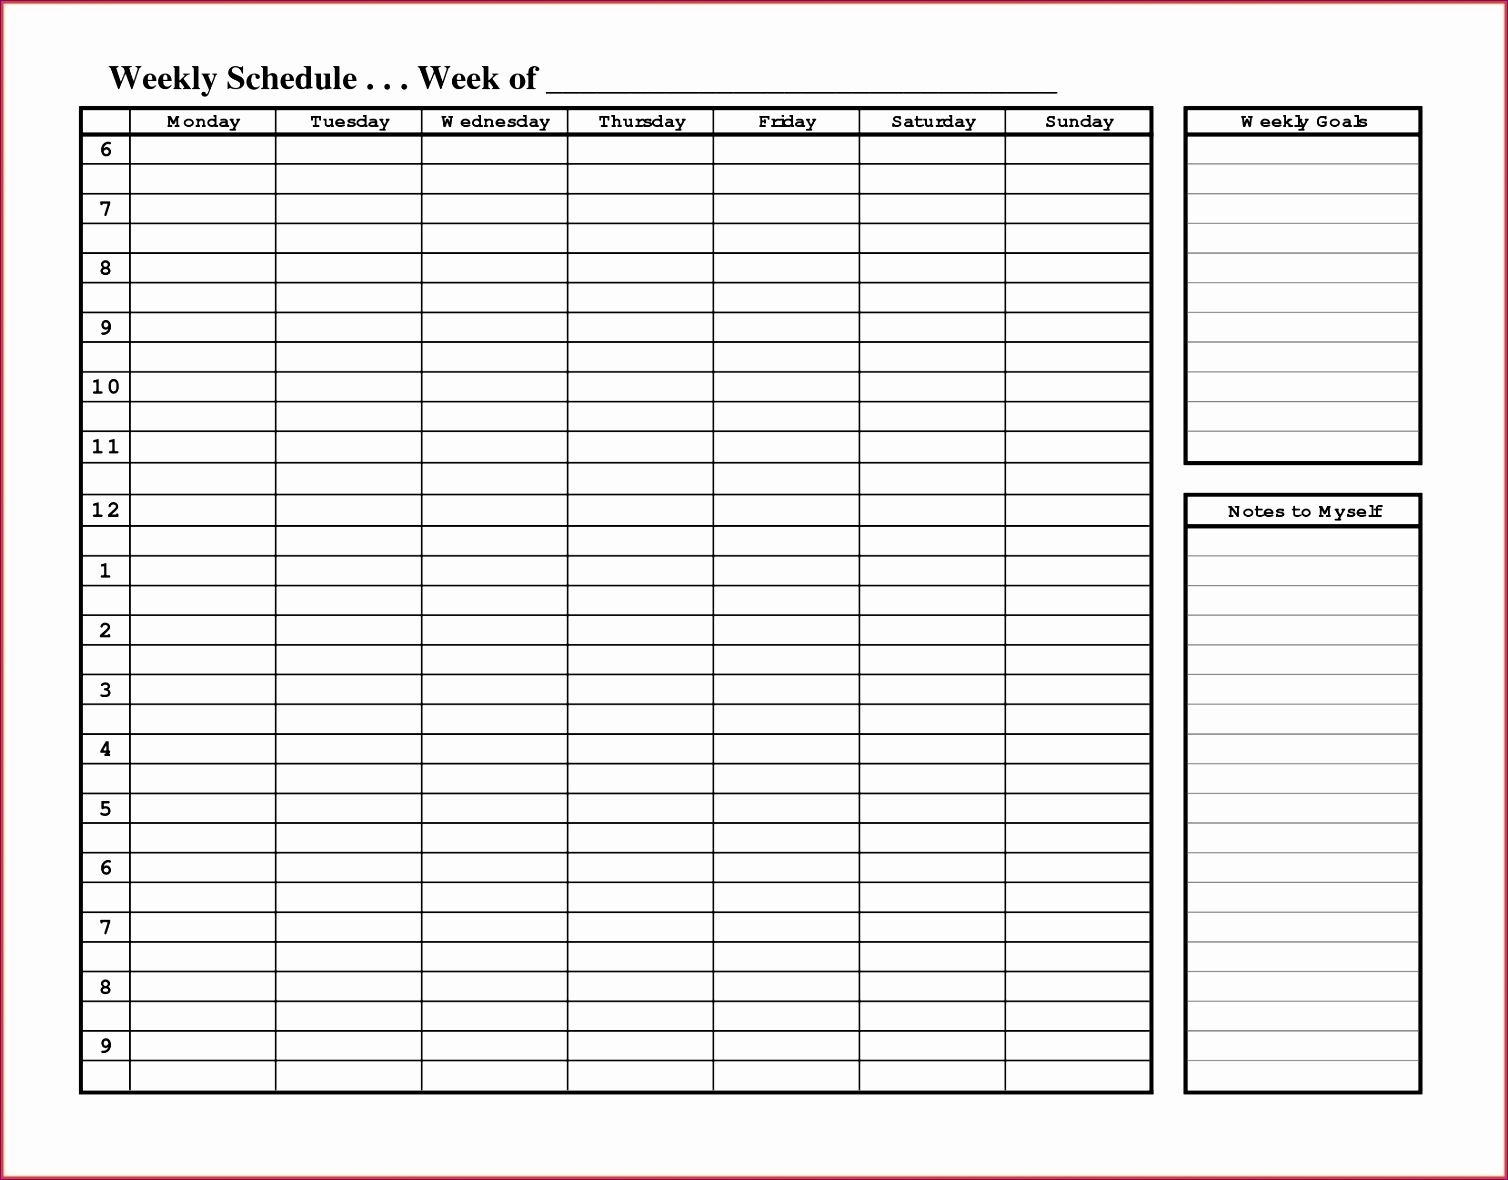 weekly time slots with schedule 49